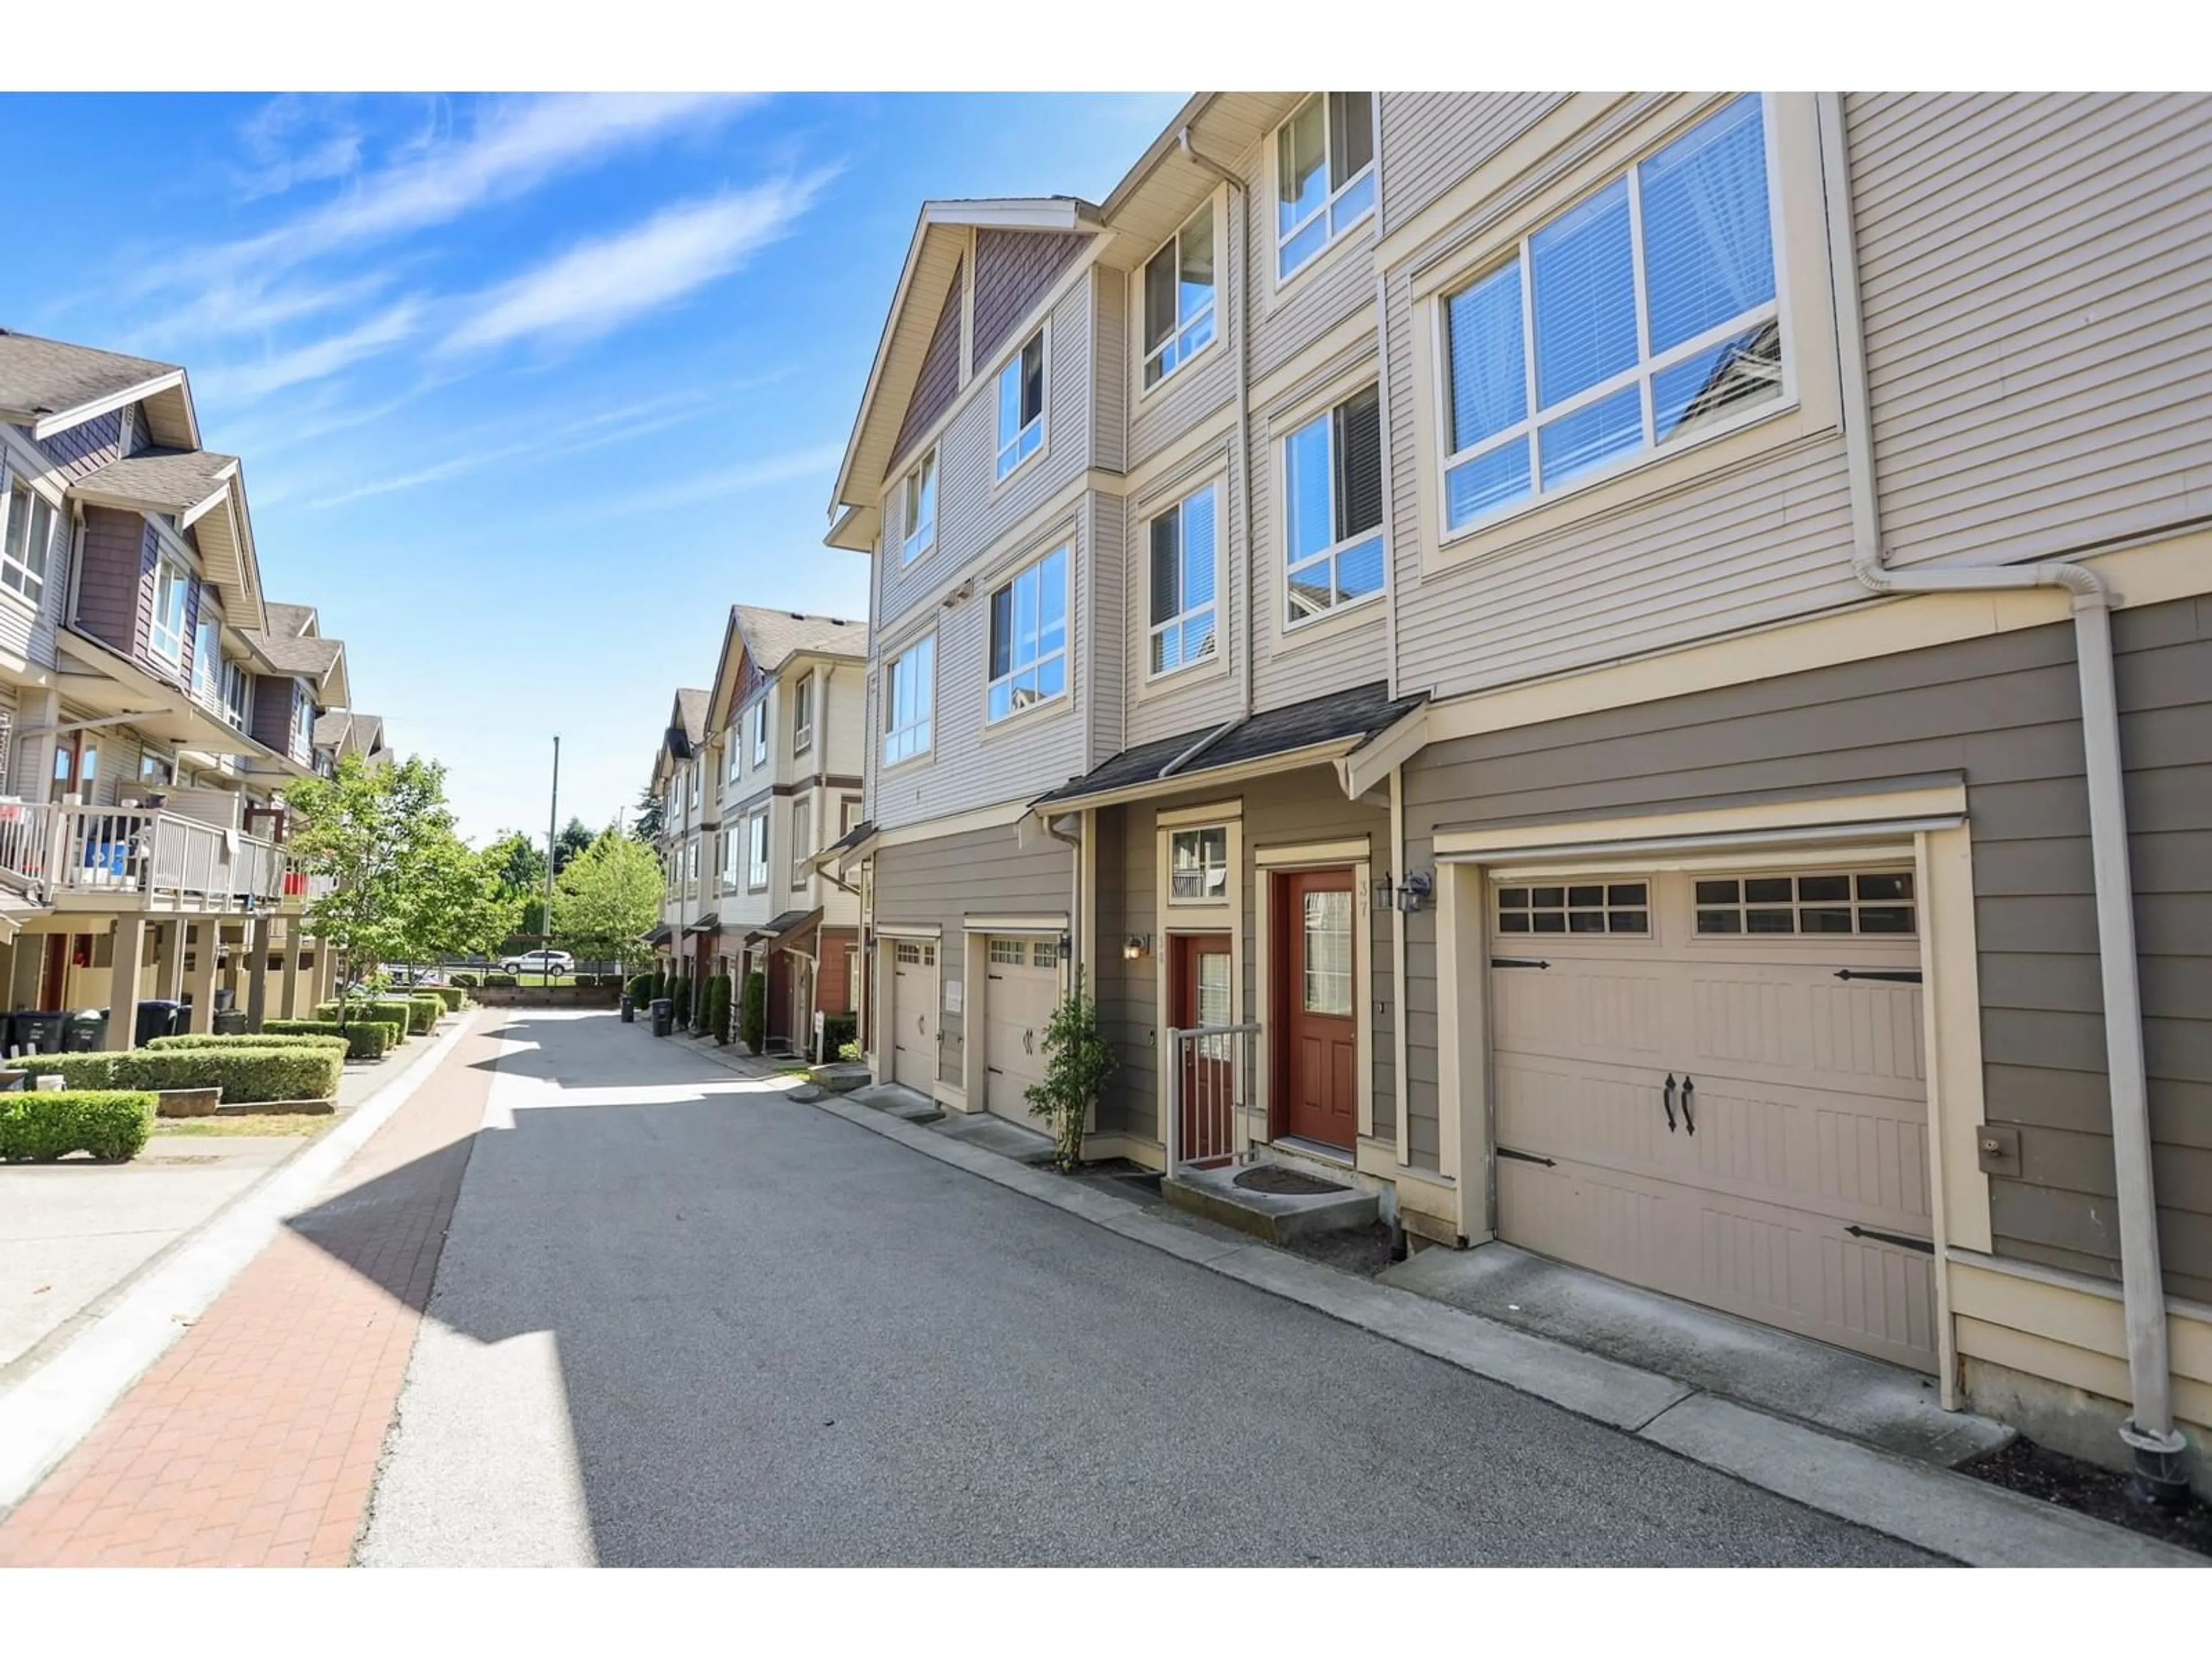 A pic from exterior of the house or condo for 37 19560 68 AVENUE, Surrey British Columbia V4N5Y5